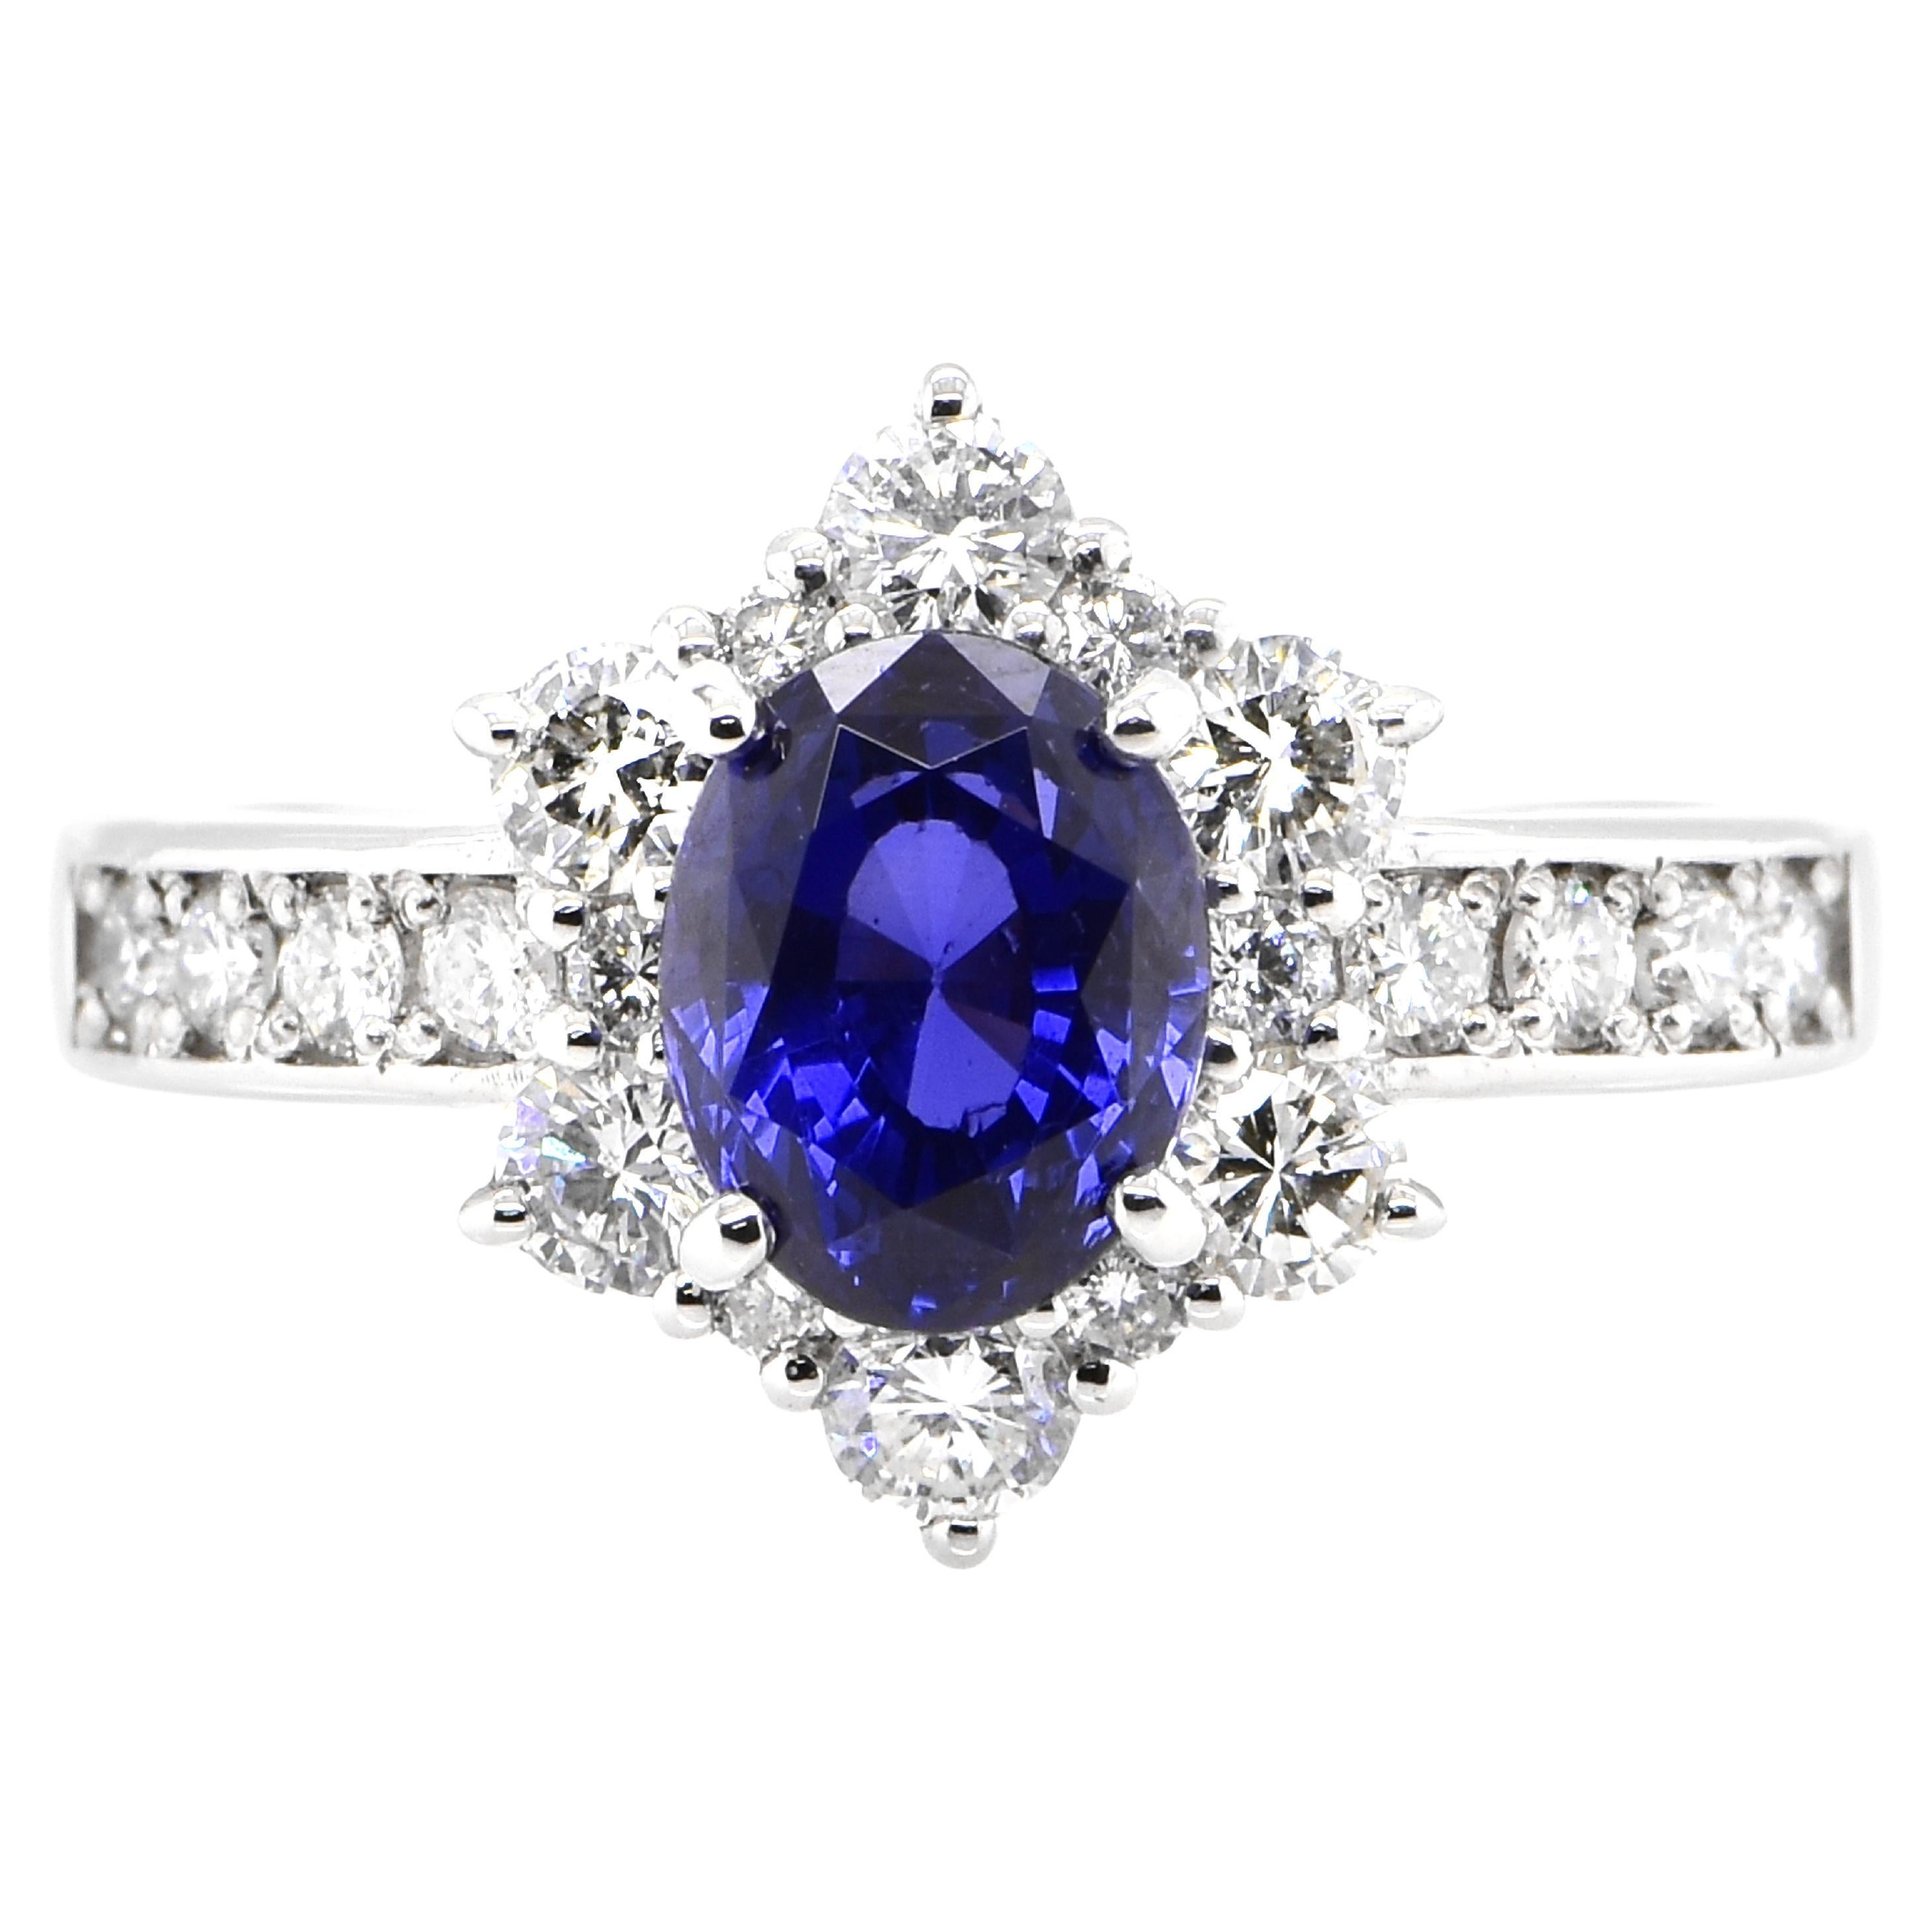 GIA Certified 2.02 Carat, Color-Change Sapphire and Diamond Ring set in Platinum For Sale